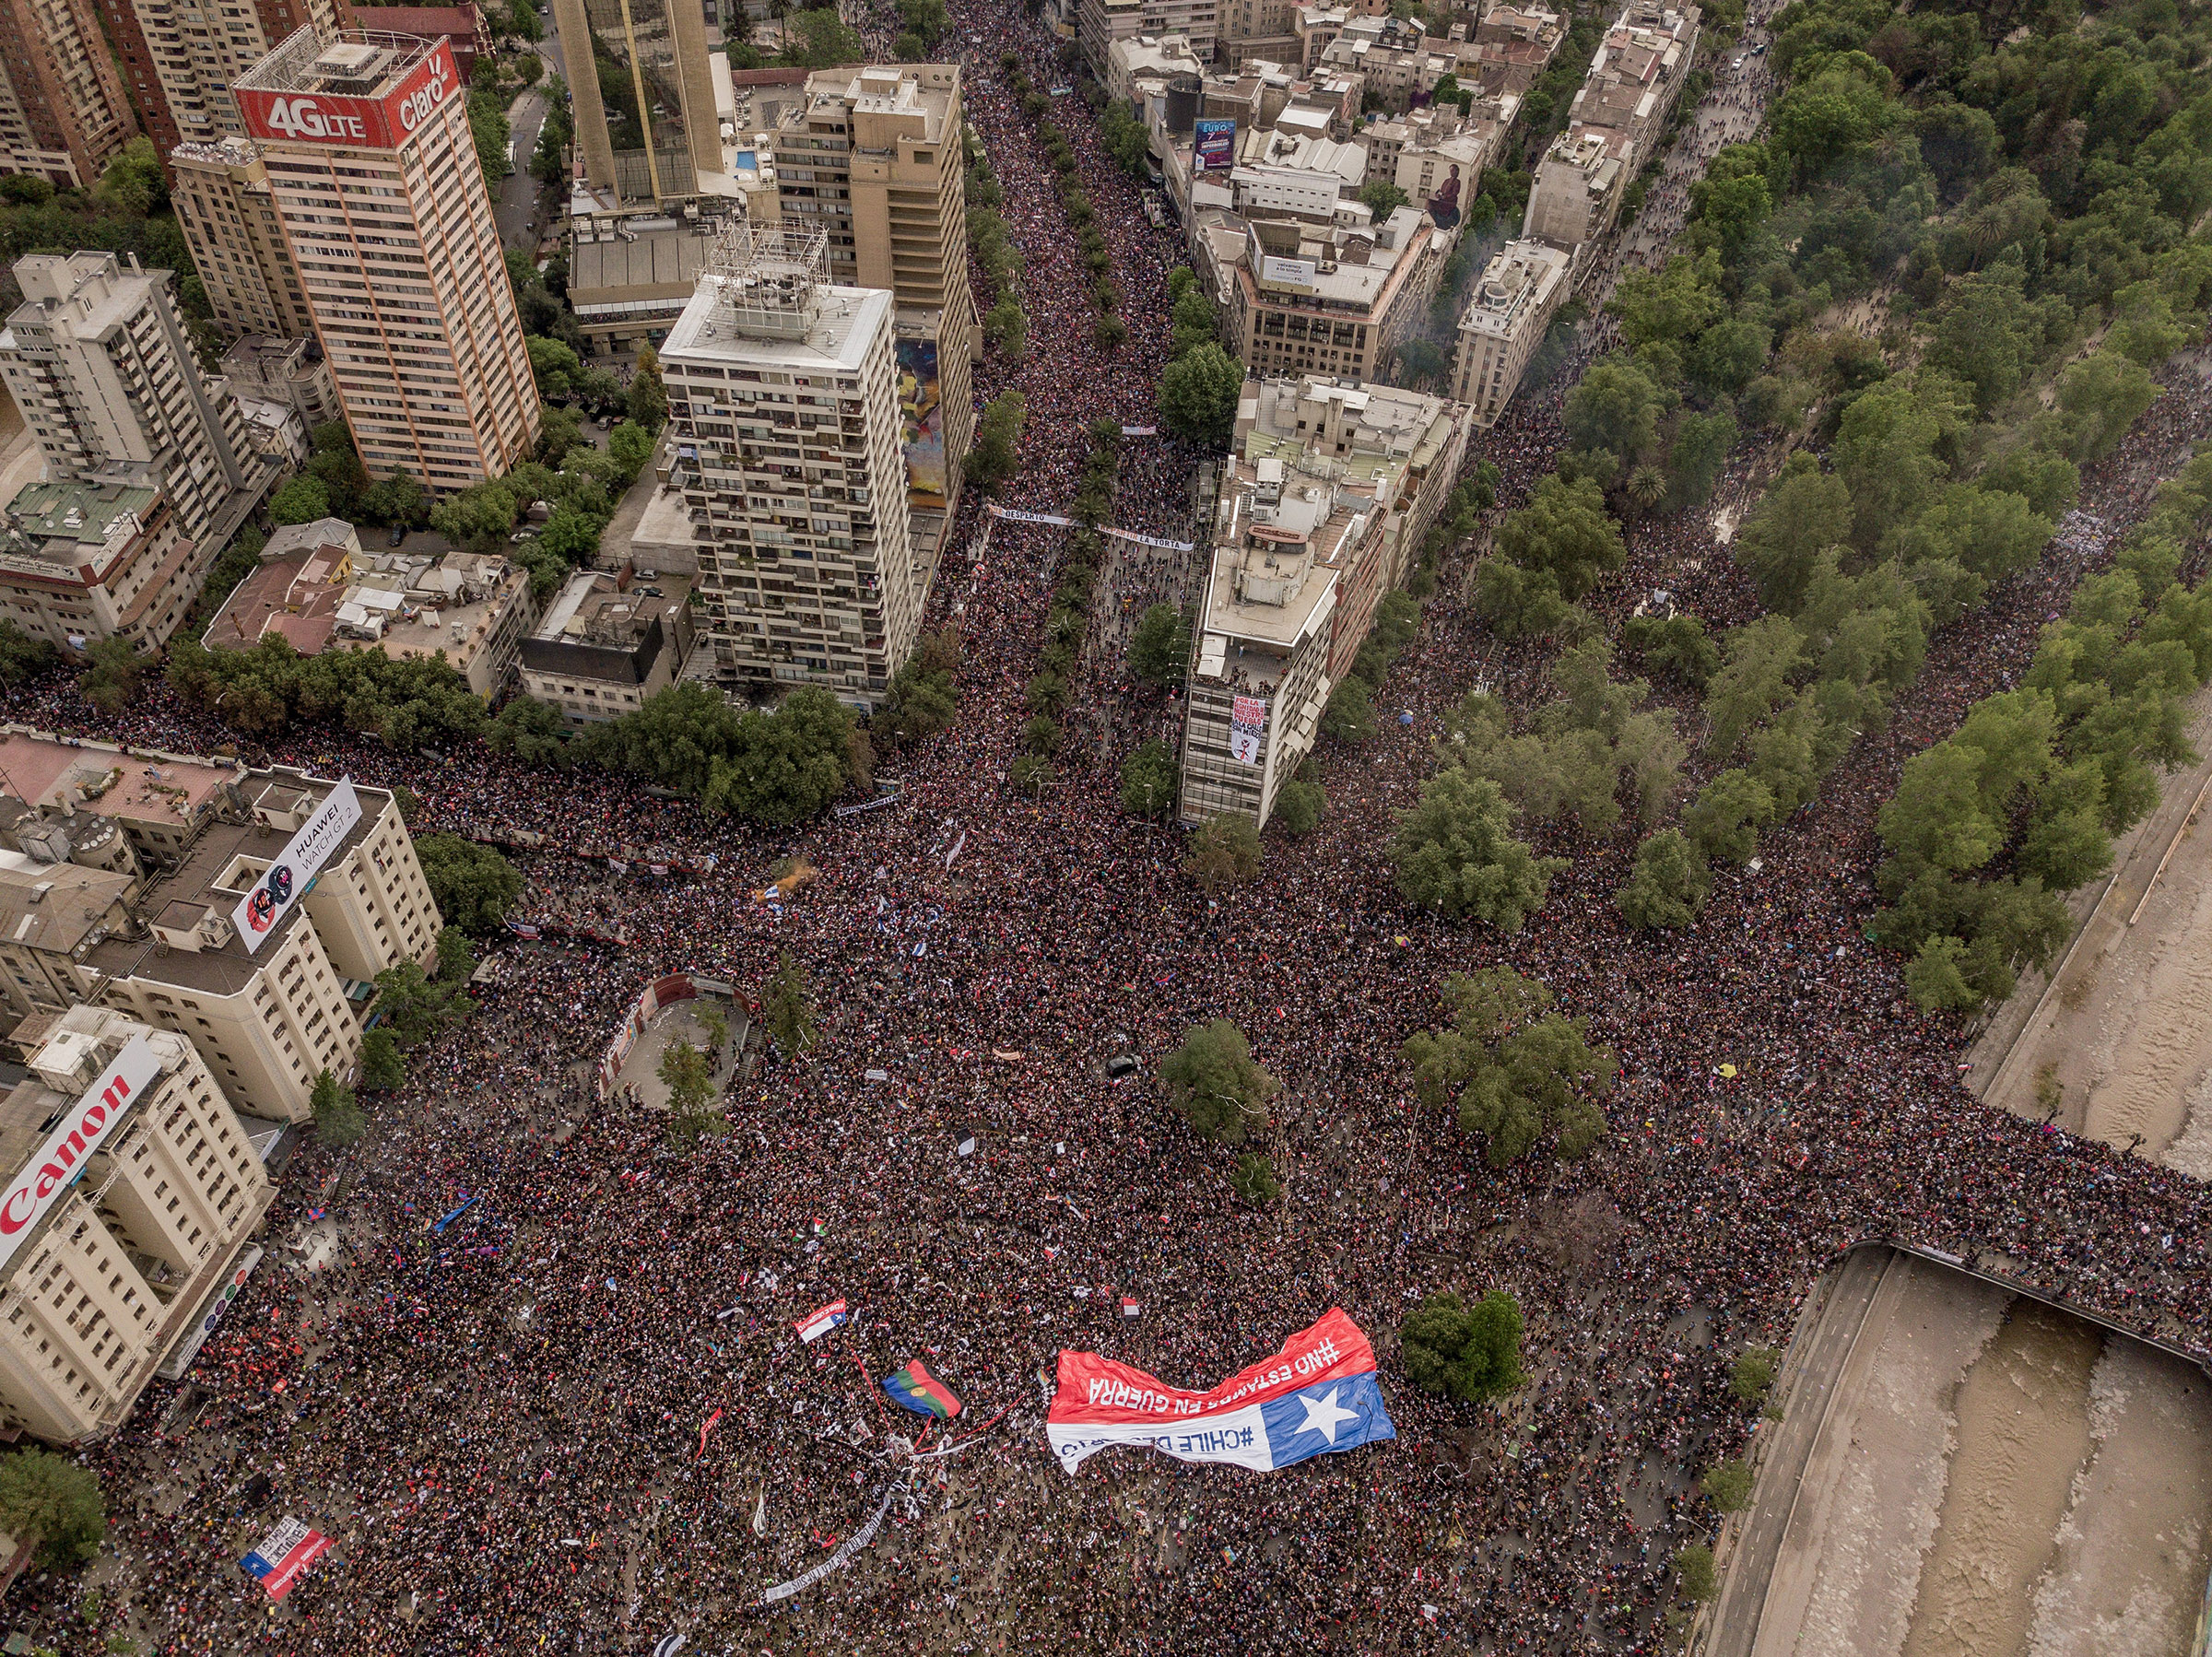 Protesters take to the streets in Santiago, Chile, Oct. 25, 2019. (Tomas Munita/The New York Times)